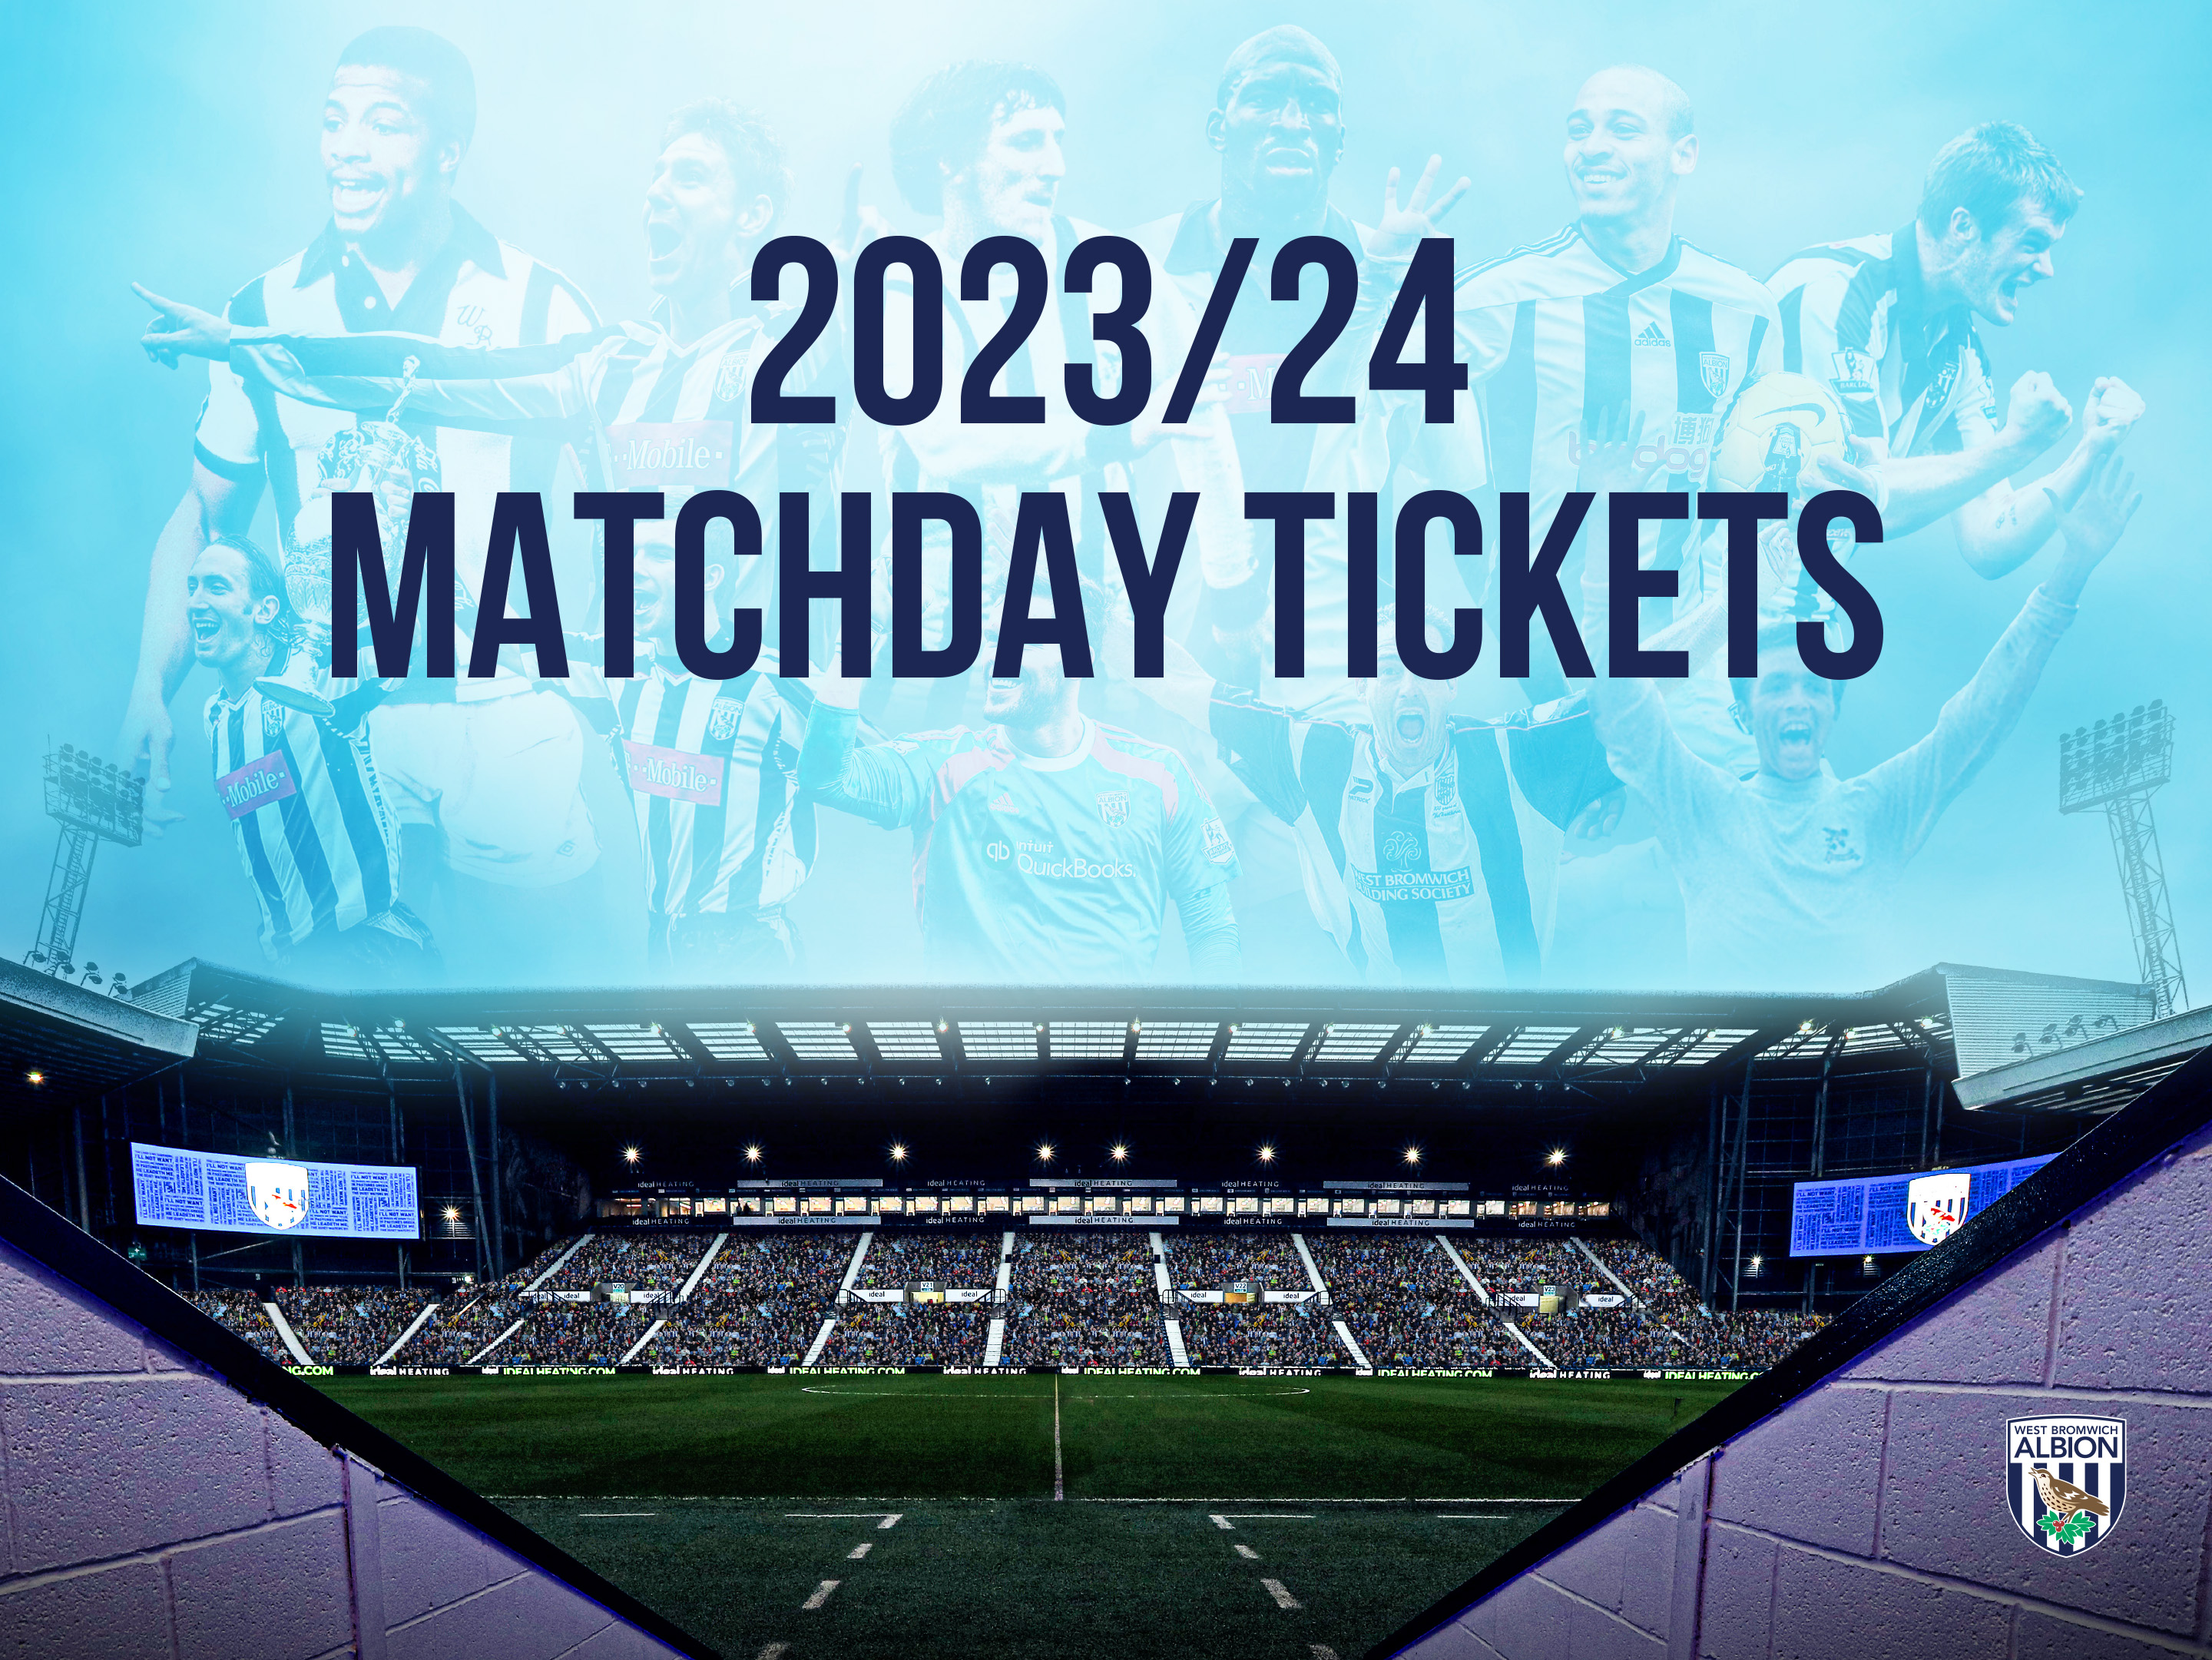 Matchday ticket prices graphic for 2023/24 season